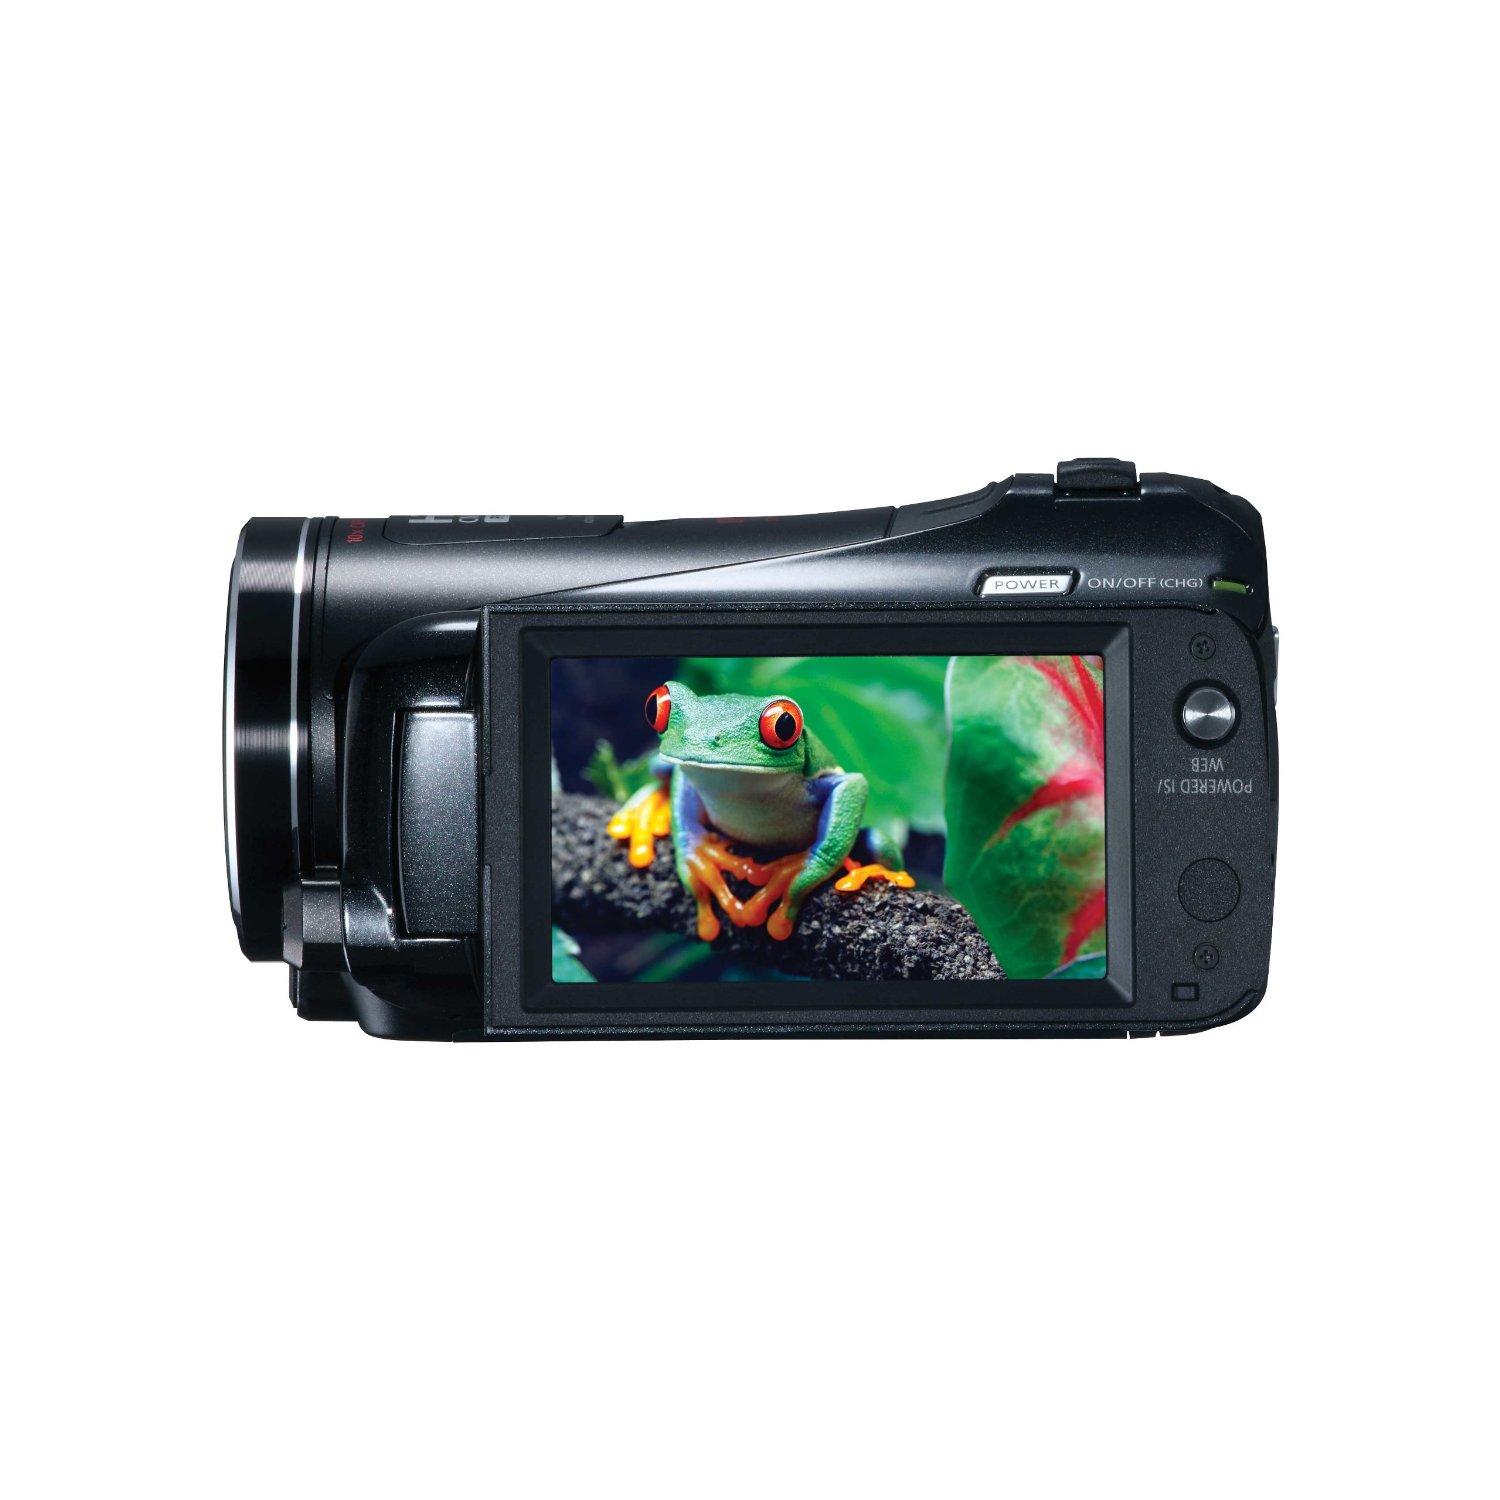 http://thetechjournal.com/wp-content/uploads/images/1111/1320777175-canon-vixia-hf-m40-full-hd-camcorder-with-hd-cmos-pro-3.jpg